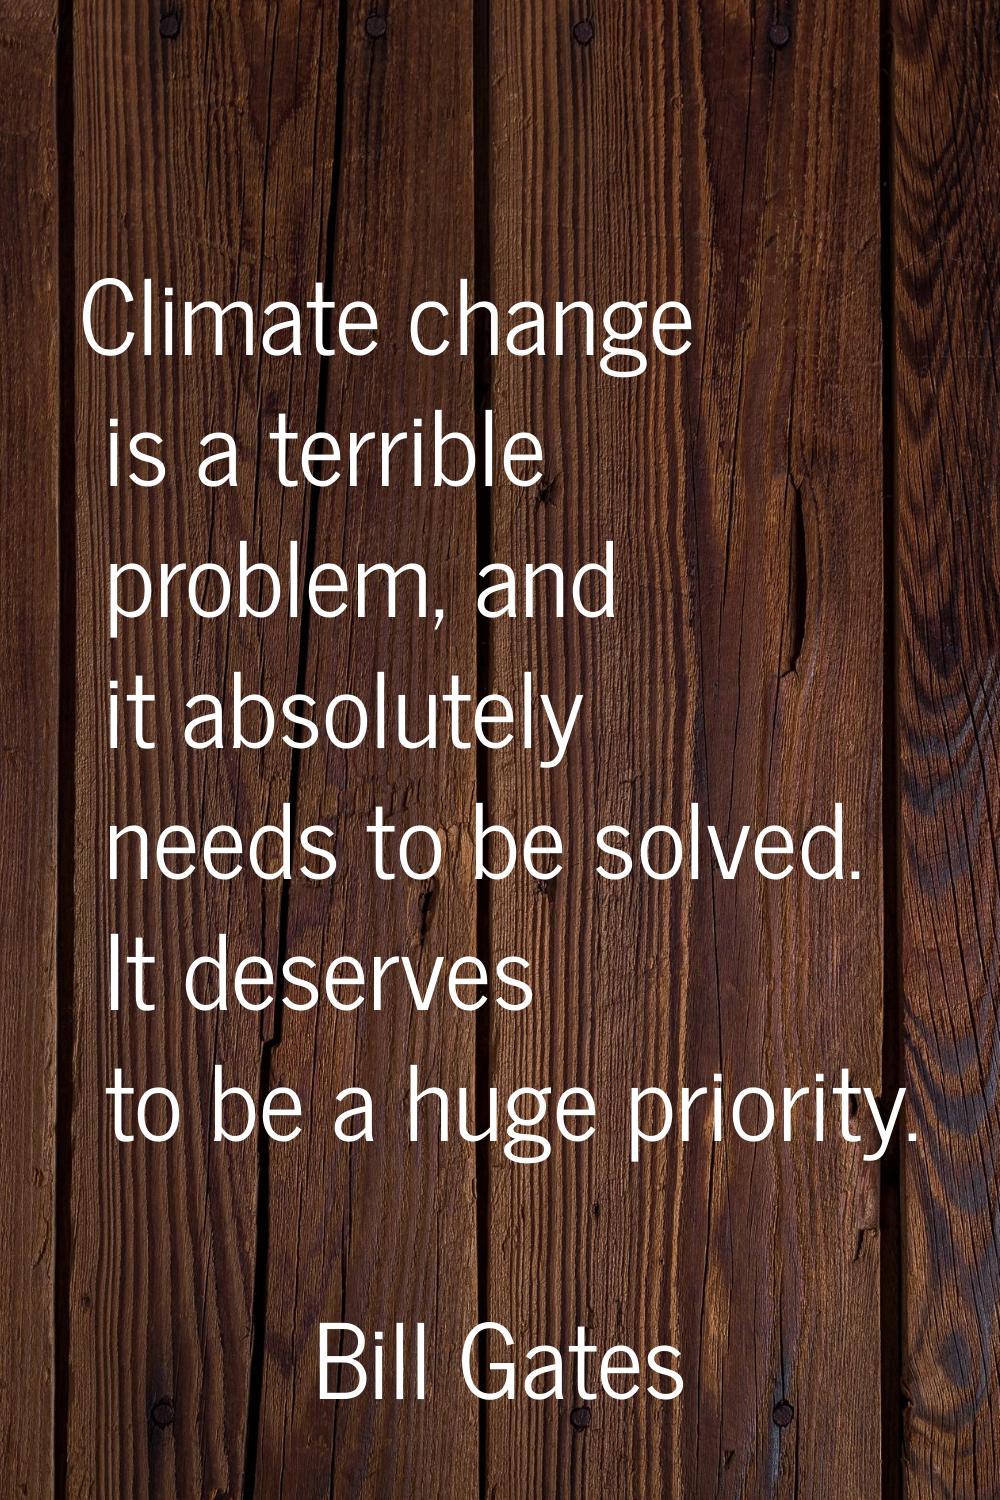 Climate change is a terrible problem, and it absolutely needs to be solved. It deserves to be a hug